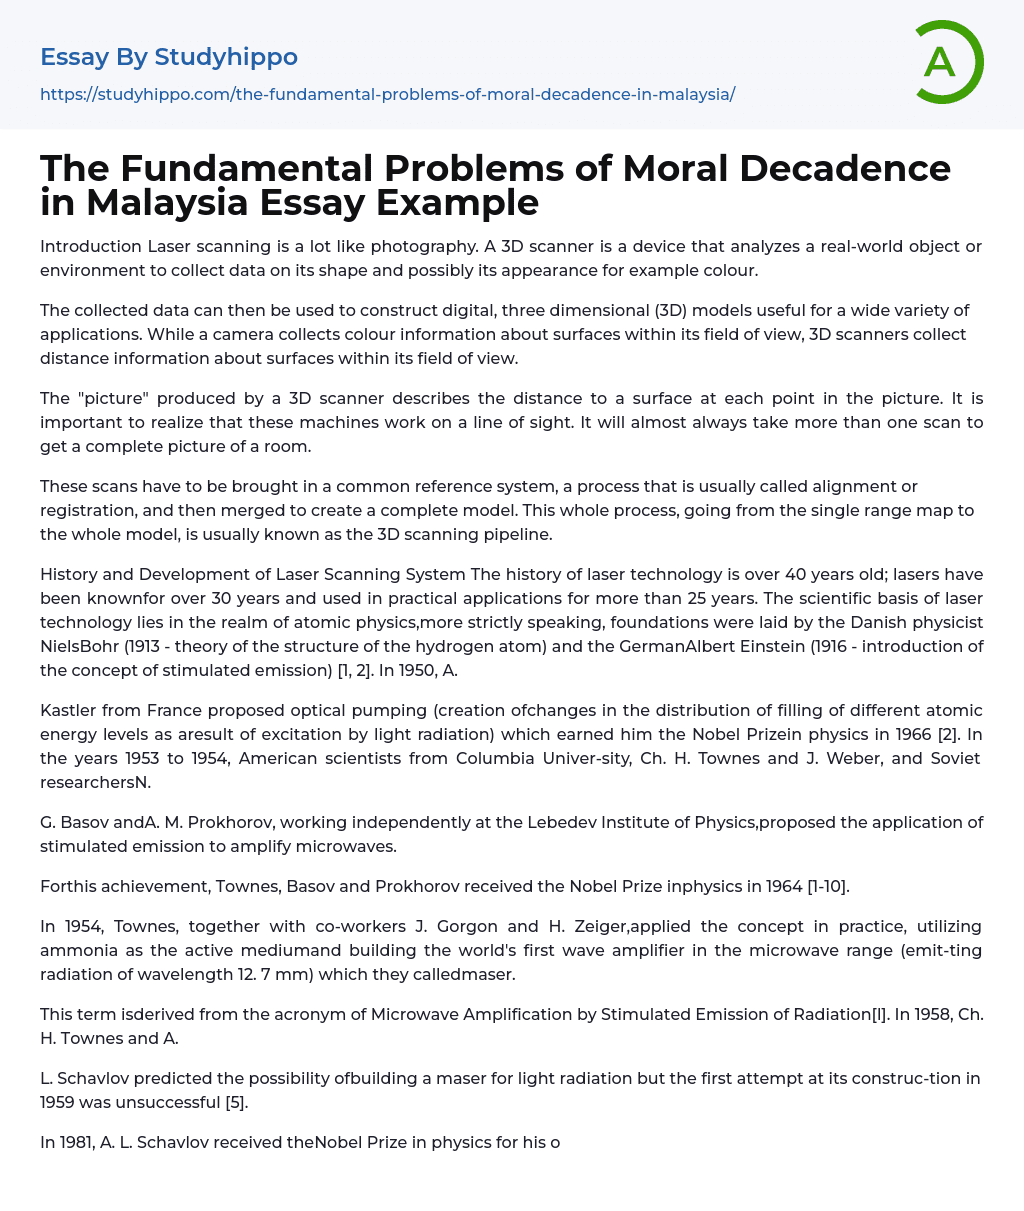 The Fundamental Problems of Moral Decadence in Malaysia Essay Example